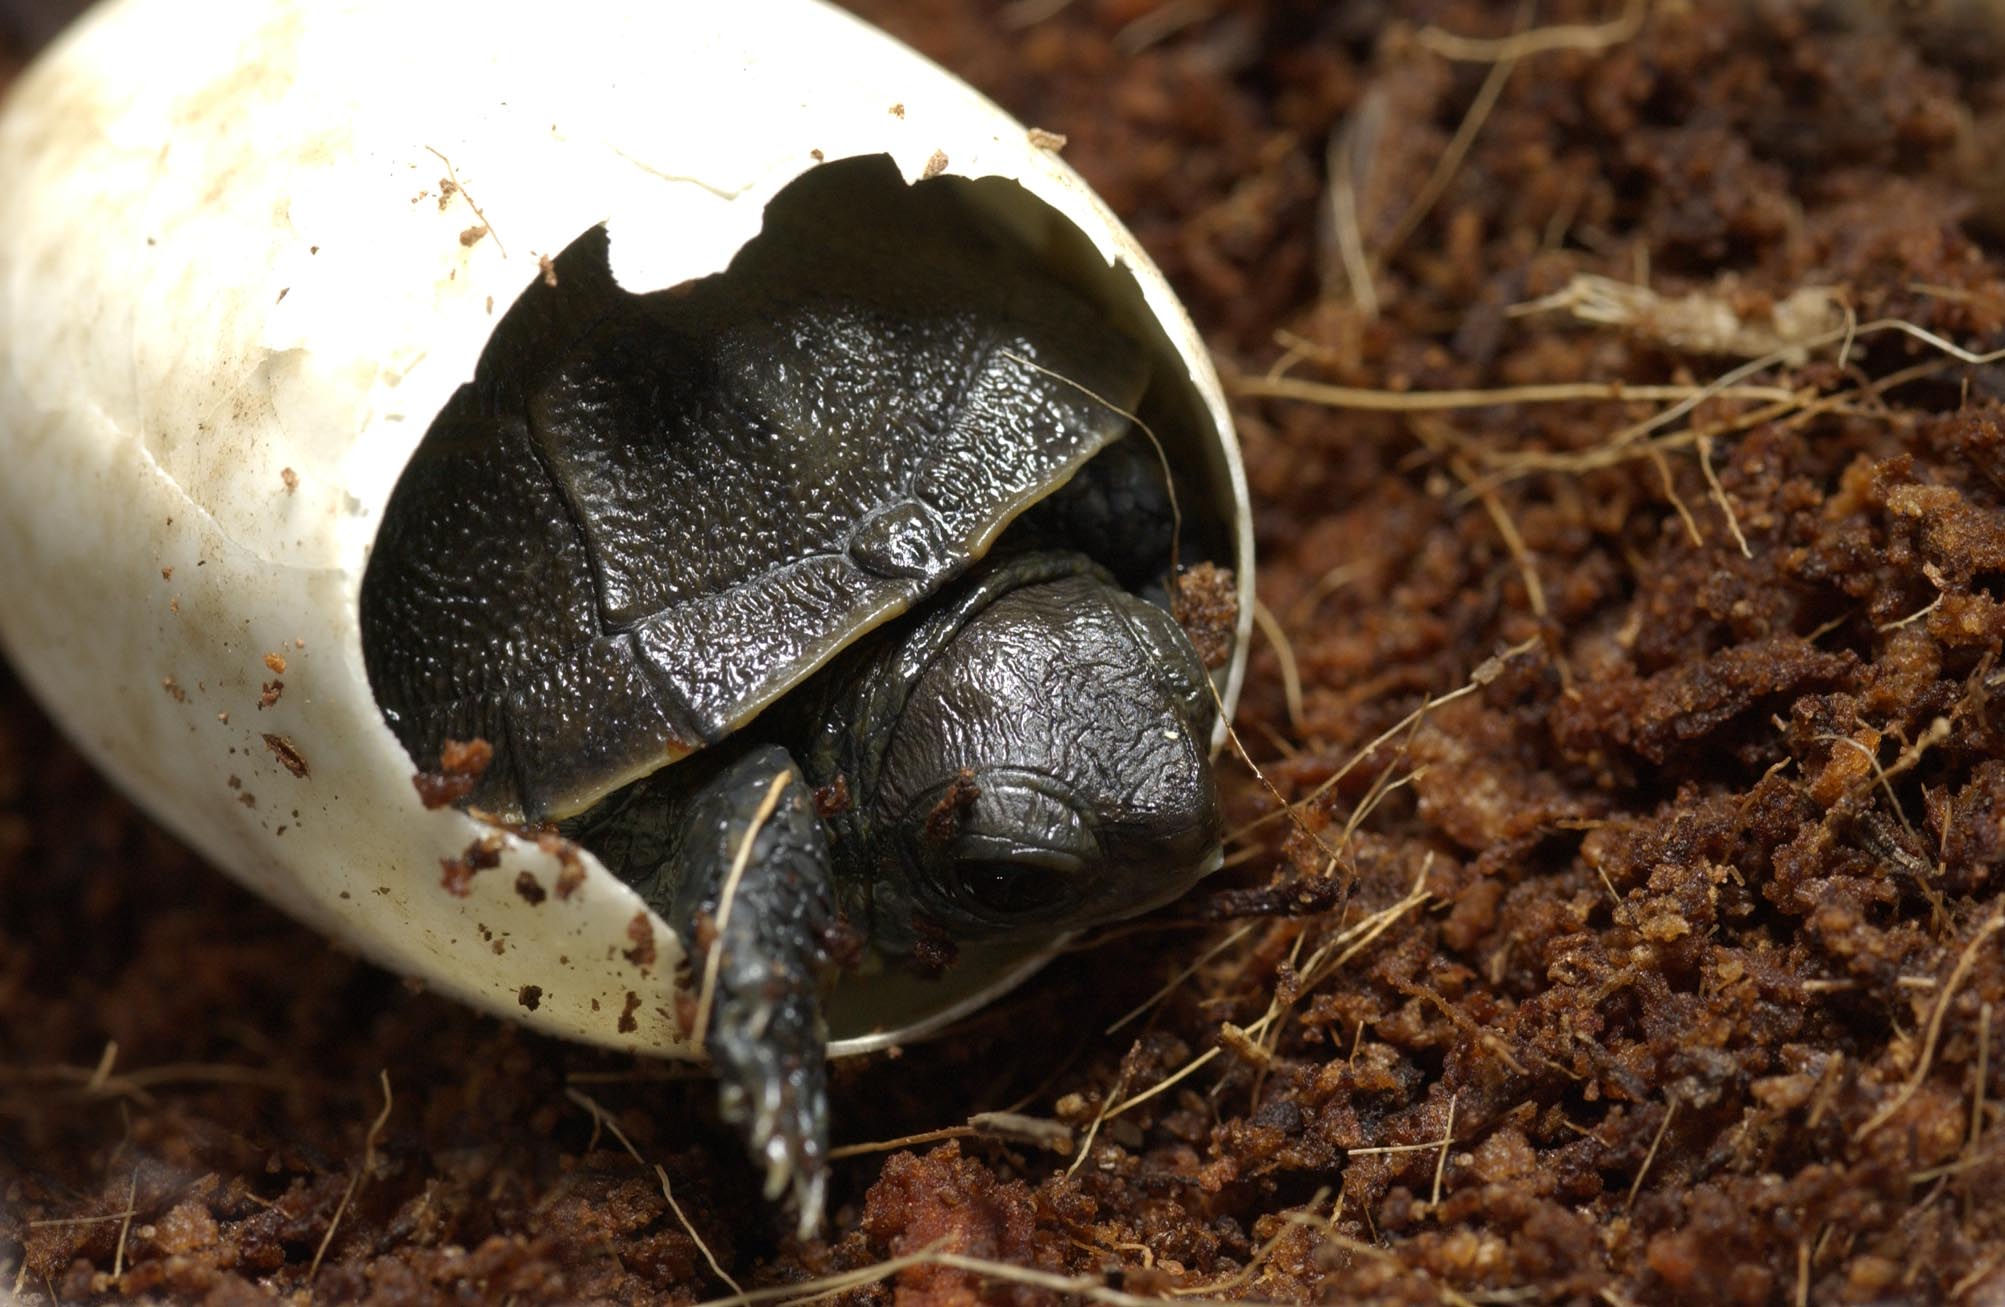 Tiny turtles take up residence at Oregon Zoo for summer growth